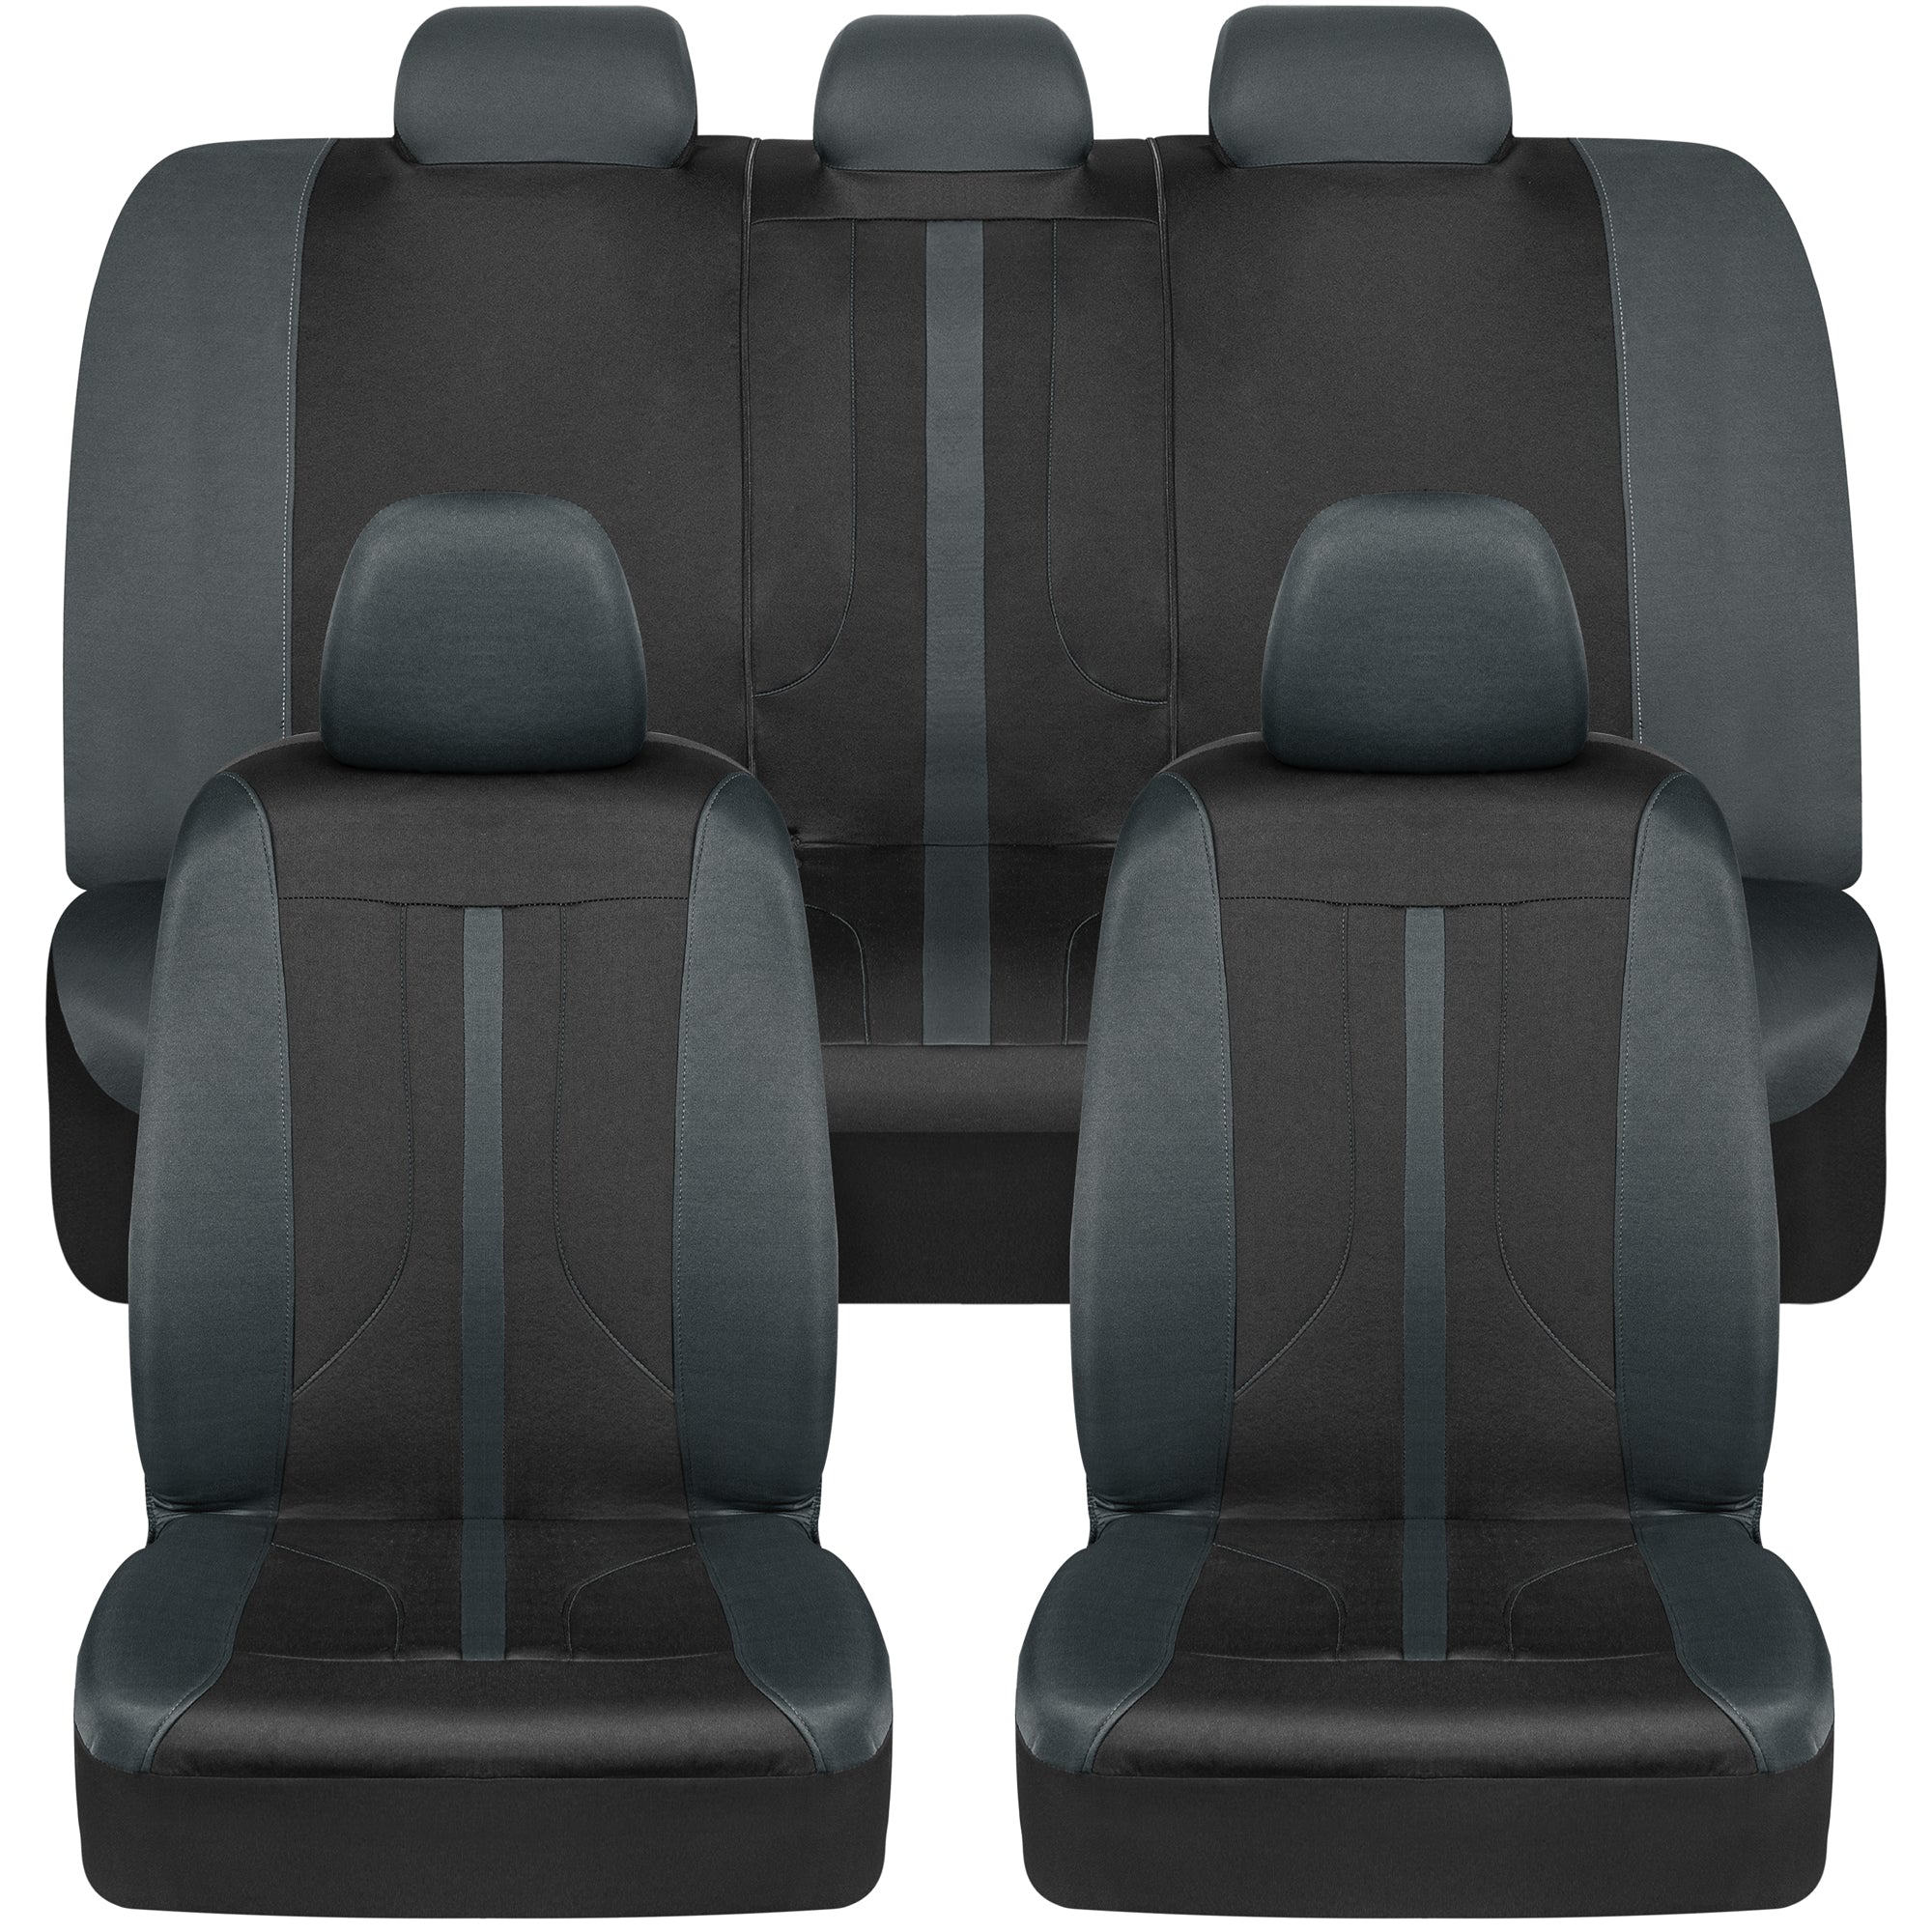 Motor Trend OmniFit Seat Covers for Cars, Two-Tone Gray Car Seat Covers Full Set with Hooded Split Bench Seat Cover, Interior Car Accessories, Automotive Seat Covers